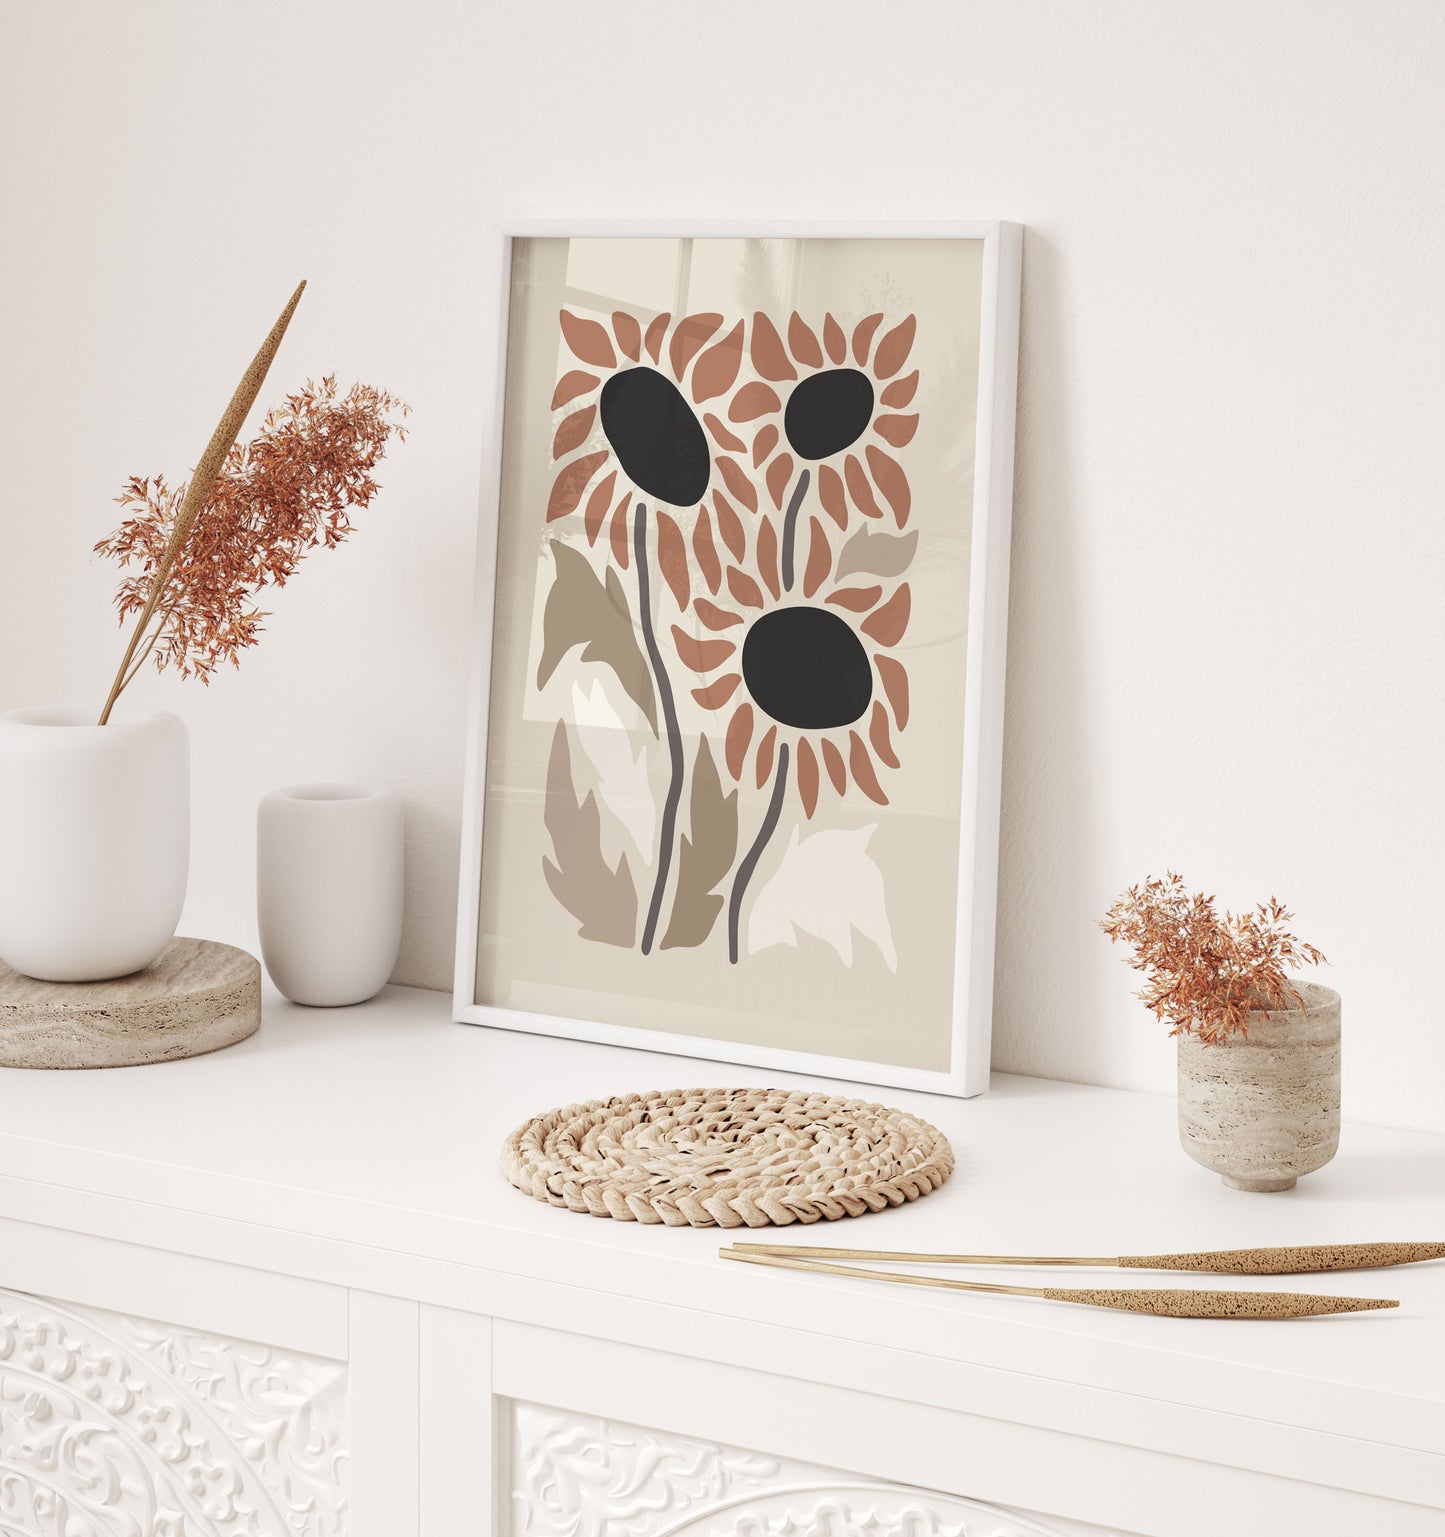 Sunflower print in a minimalist style and neutral colour palette